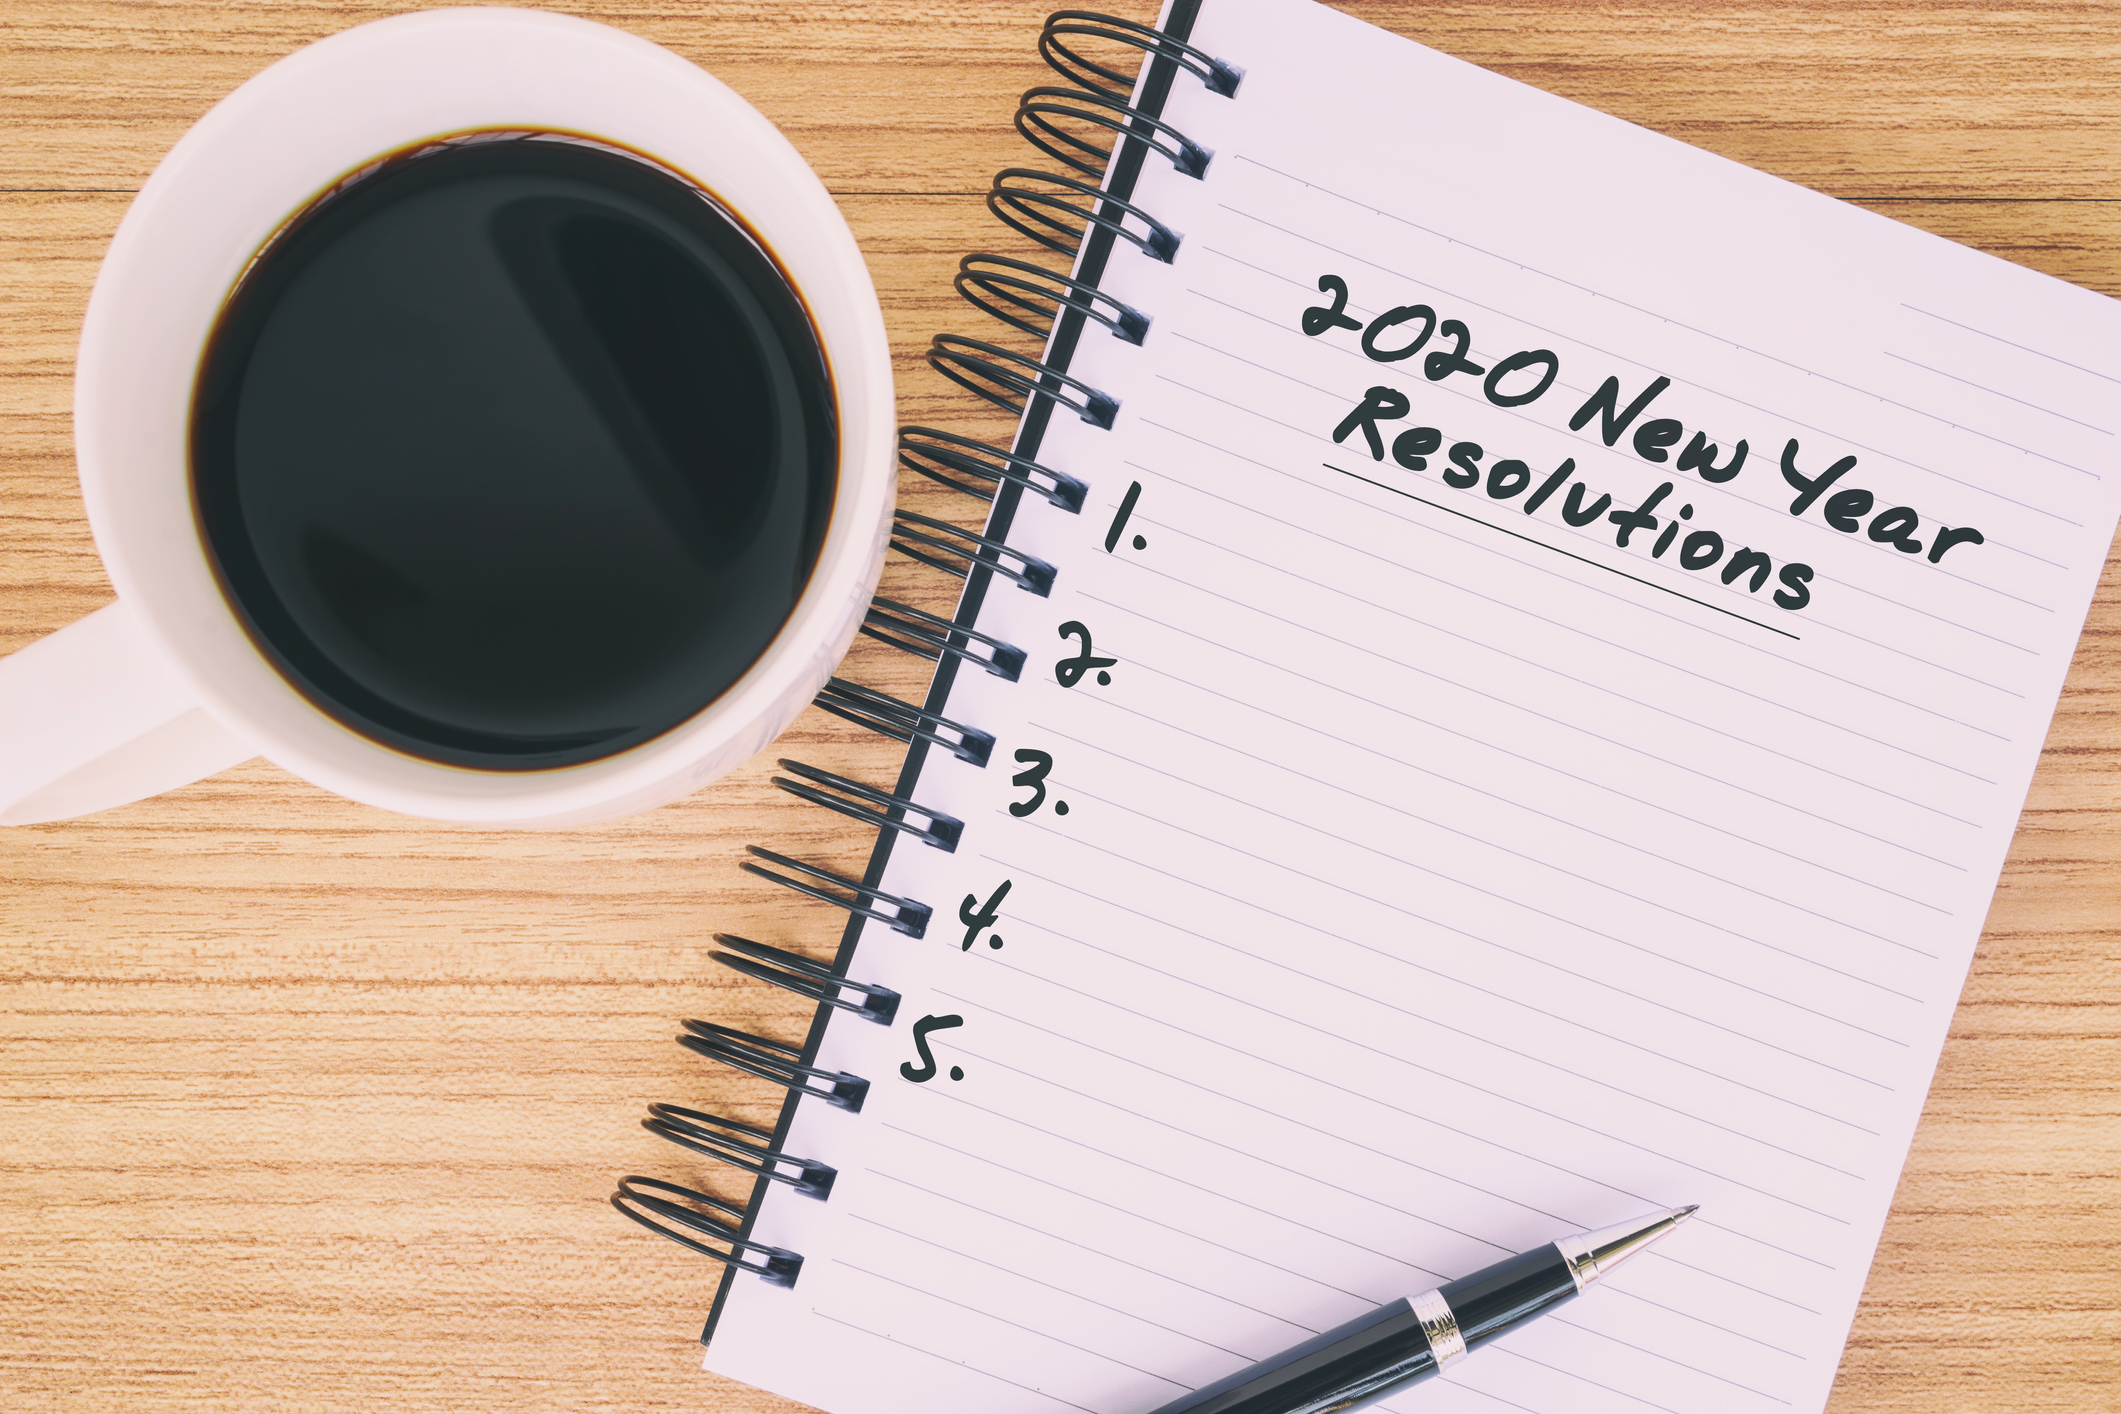 Read more about the article Public Relations Team’s New Year Resolutions